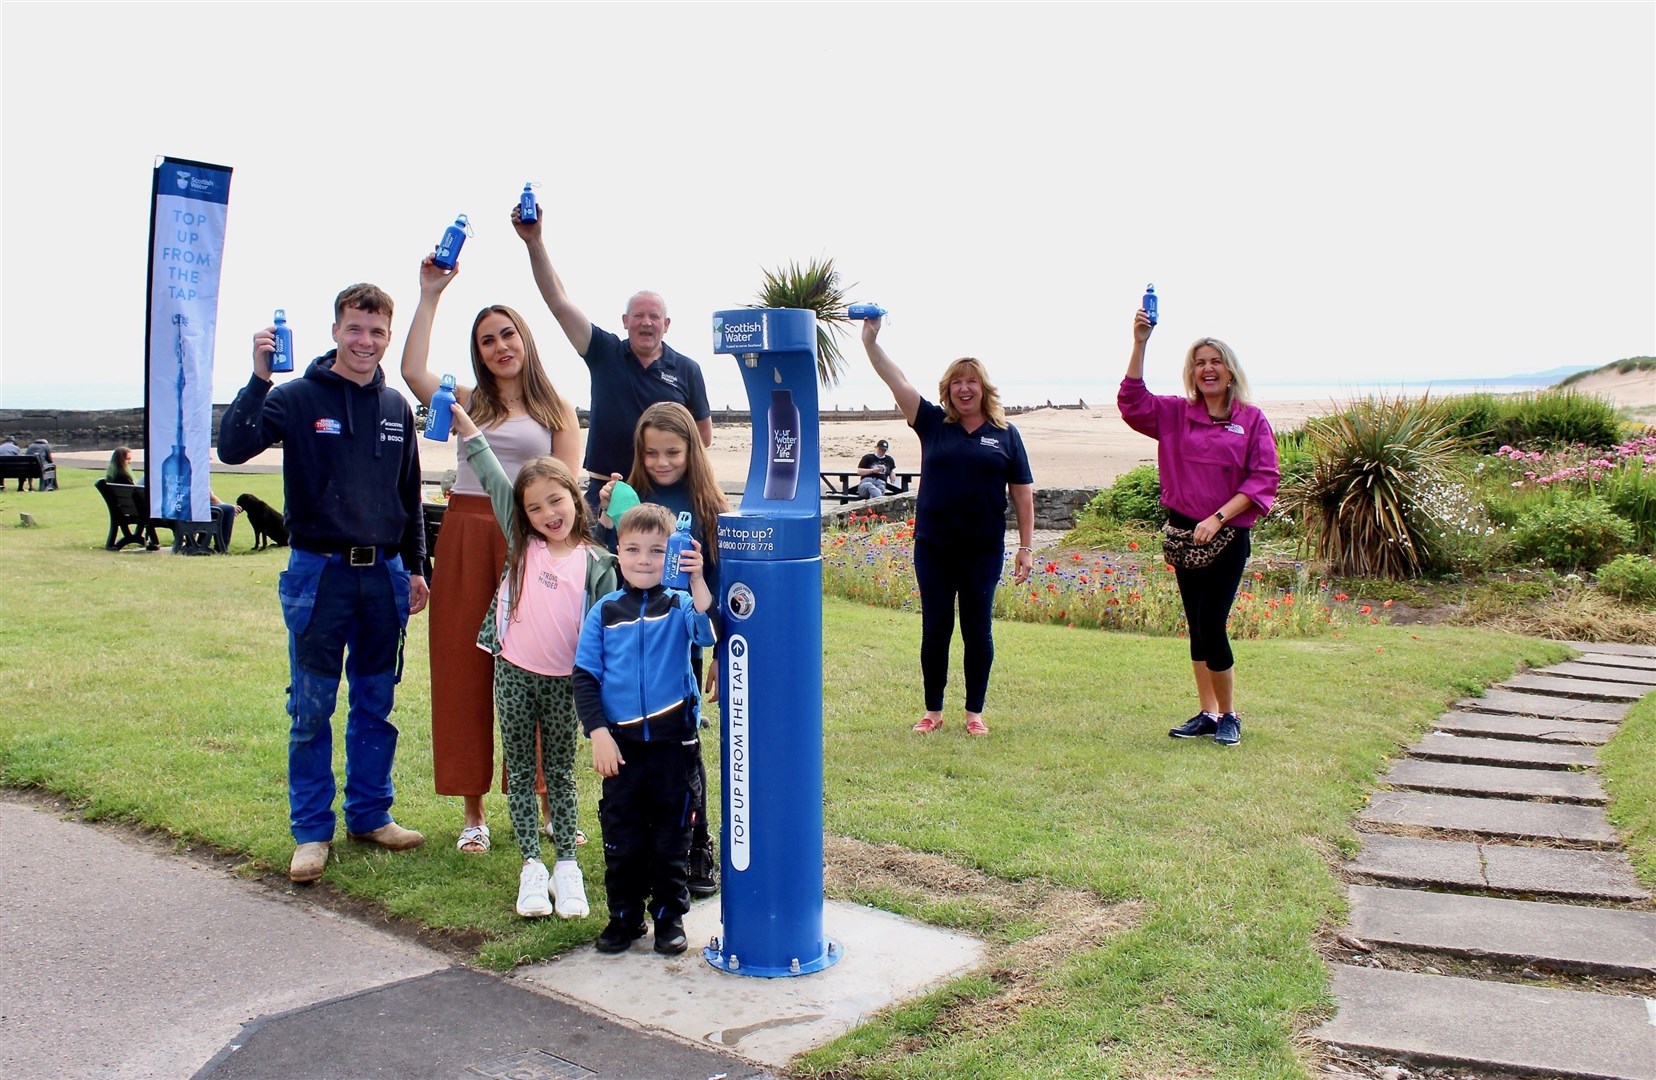 Rico Thompson (6) helping to launch Lossiemouth’s new Top Up Tap alongside his dad Jack, mum Katie and sisters Carmel (10) and Skylar-Rae (7), with Ewan Shand and Elaine Macarthur from Scottish Water’s local team and Carolle Ralph from Lossiemouth Community Council.